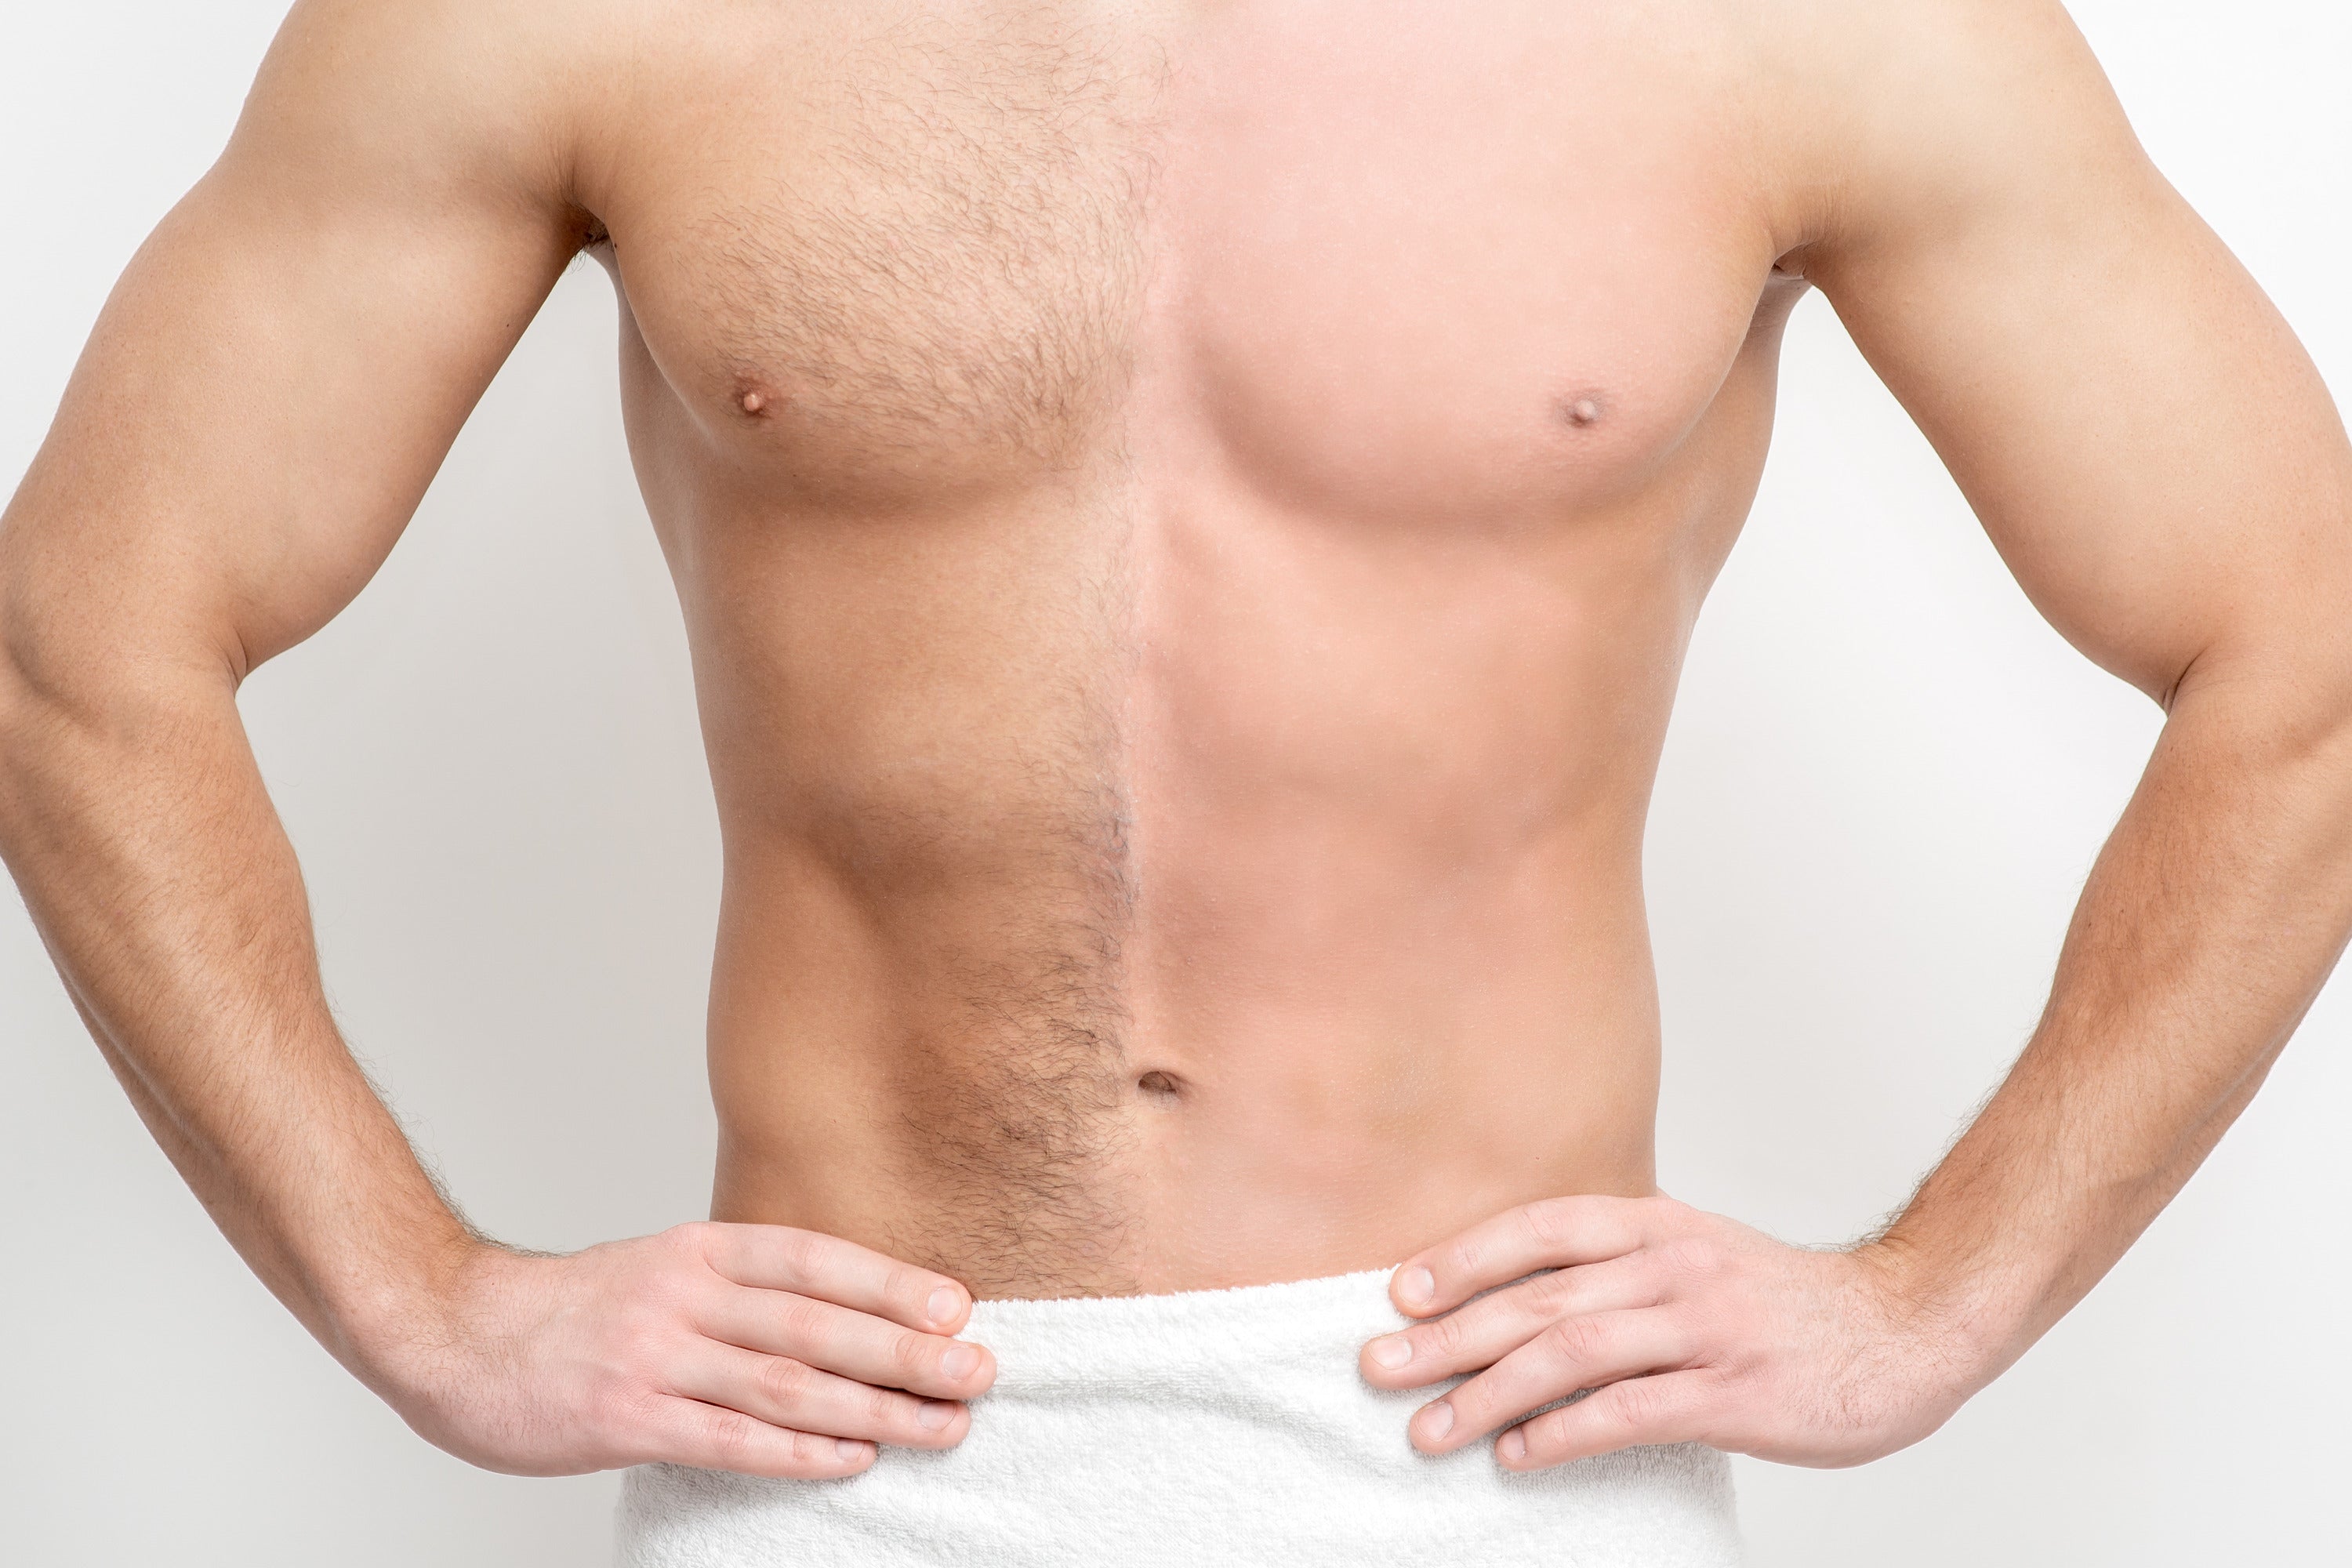 Comparison of Hard Waxing and Other Hair Removal Methods